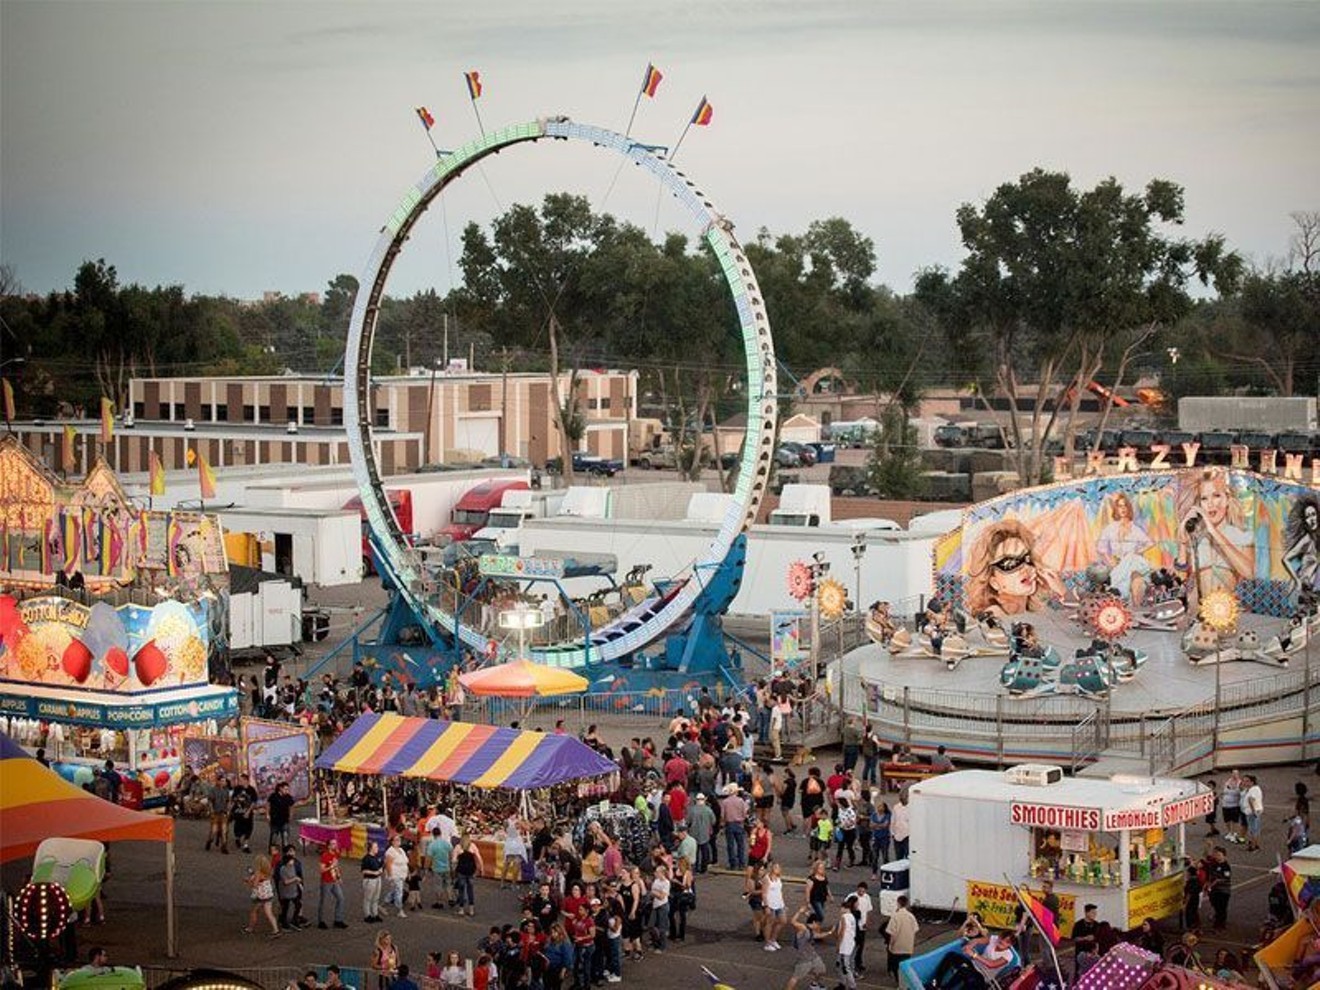 The Colorado State Fair turned 150 last year!